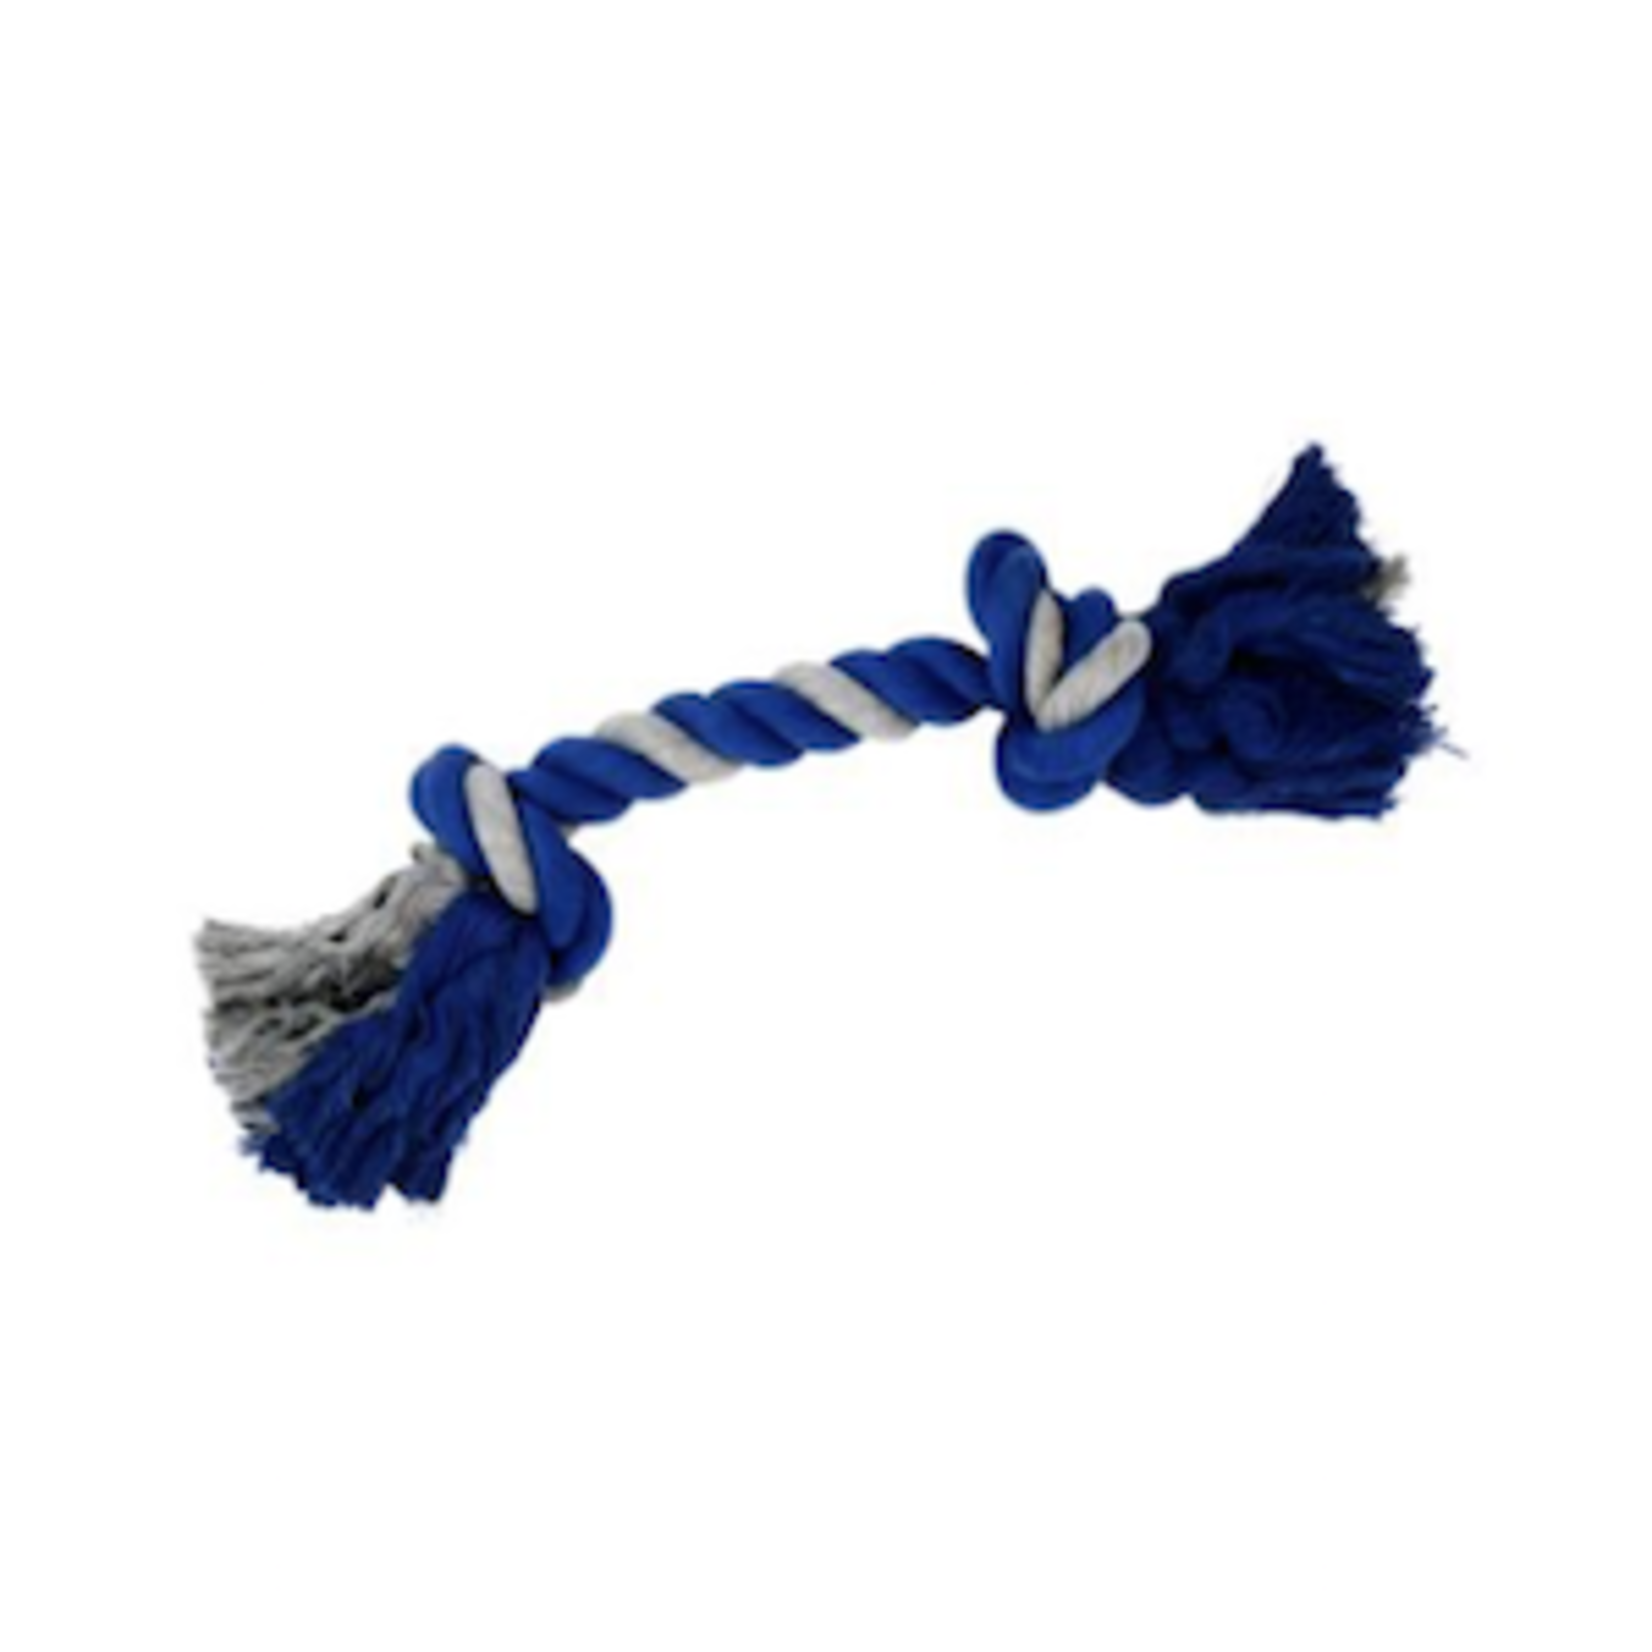 BUD-Z Bud'Z Rope Dog Toy With 2 Knots Gray And Blue 20"